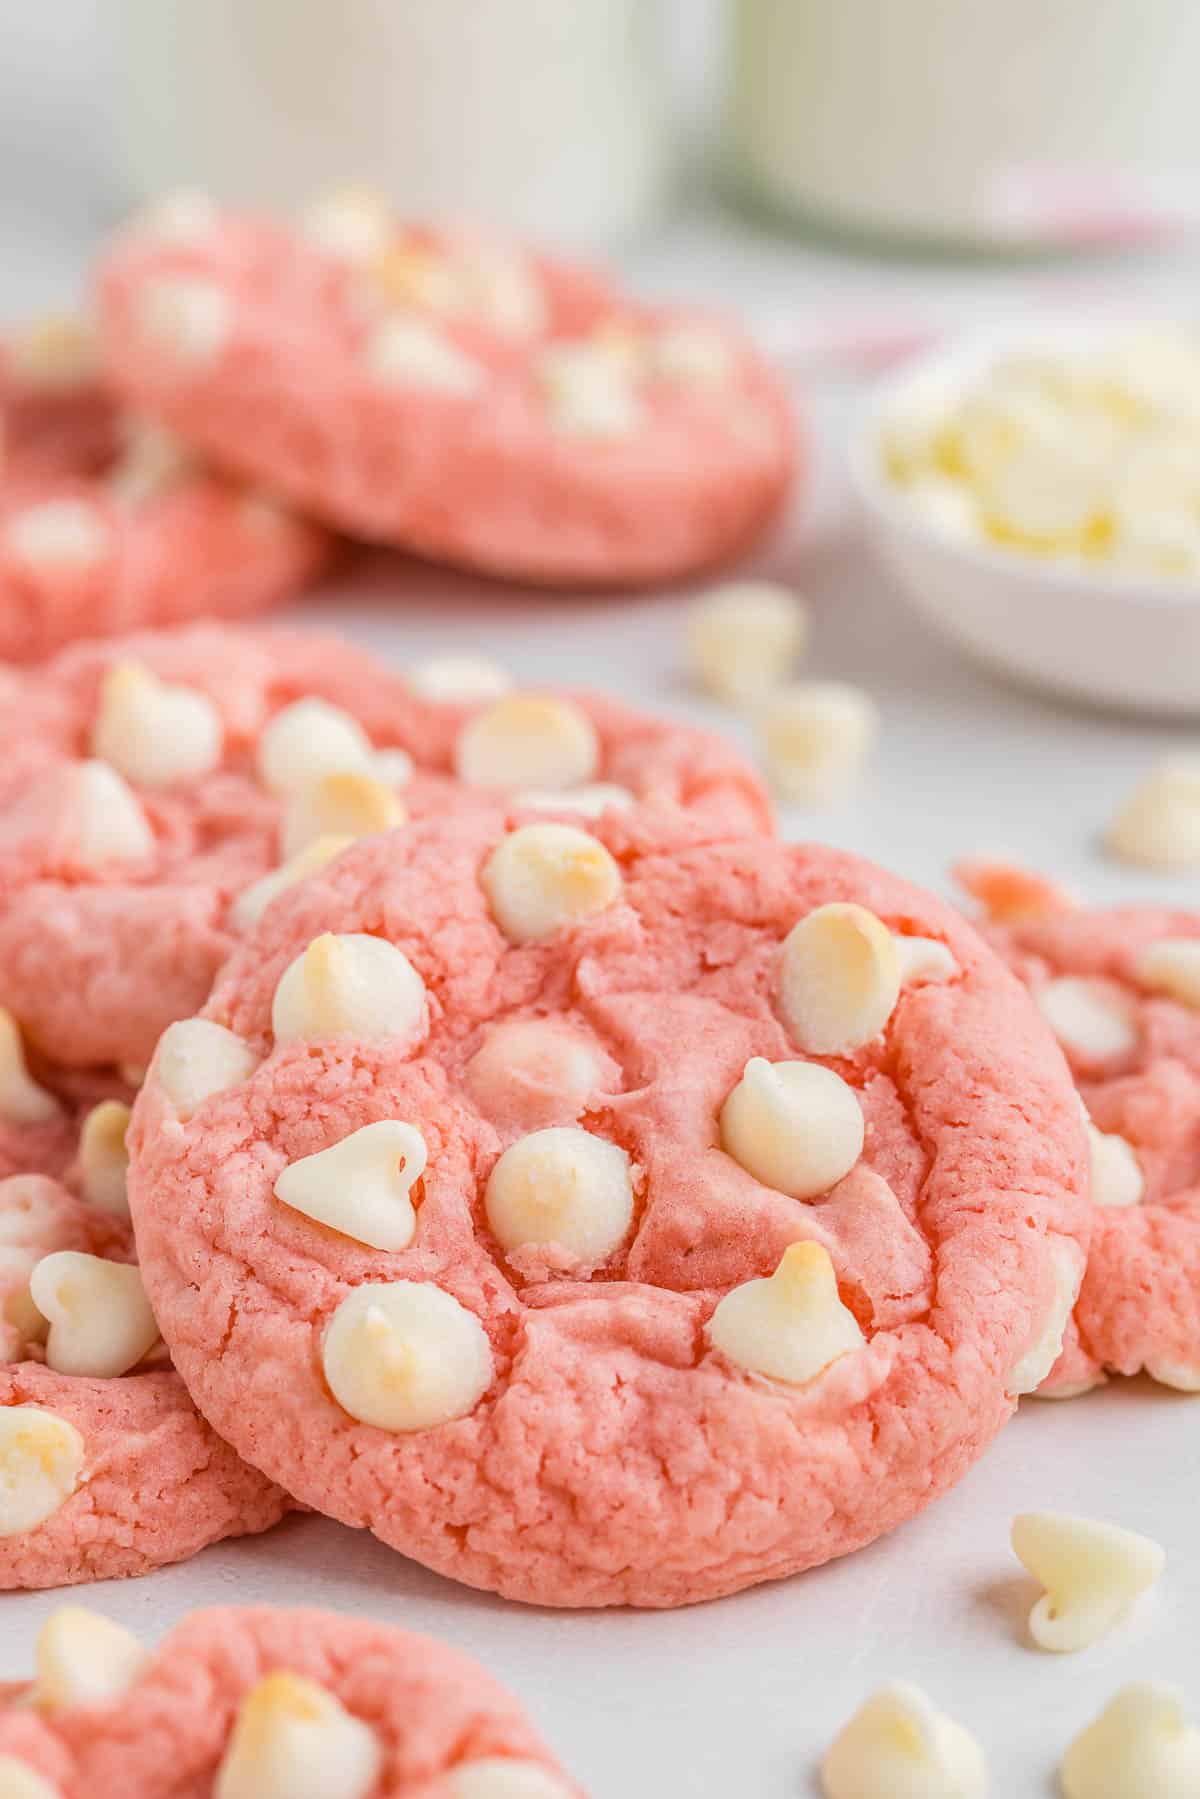 A pile of strawberry cookies with white chocolate chips.